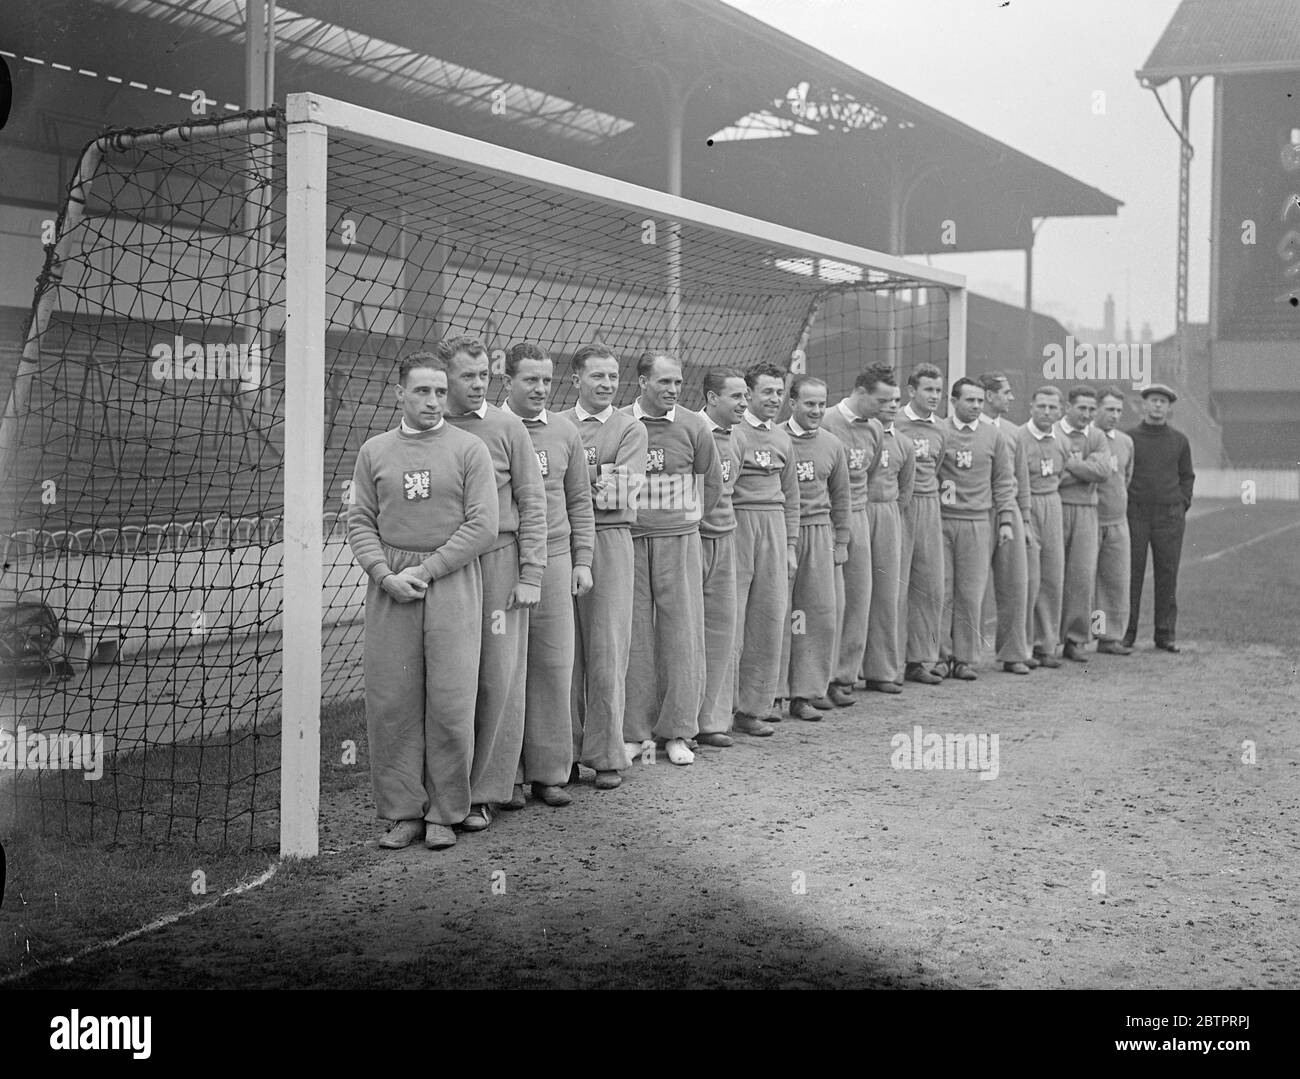 Czech footballers practice at Tottenham. The Czechoslovakian football team which is to meet England in the first international match between the two countries played in Britain, tomorrow (Wednesday), practised at Tottenham Hotspur's ground in White Hart Lane, where the match is to take place. Photo shows, Czech players line up for a team photo. Unknown order, Antonin Puc, Karel Kolsky, Antonin Vodicka, Oldrich Nejedly, Jan Riha, Jaroslav Boucek, Frantisek Planicka (captain), Frantisek Kloz, Josef Zeman, Josef Kostalek, Ferdinand Daucik and the manager Tesar. 30 November 1937 Stock Photo